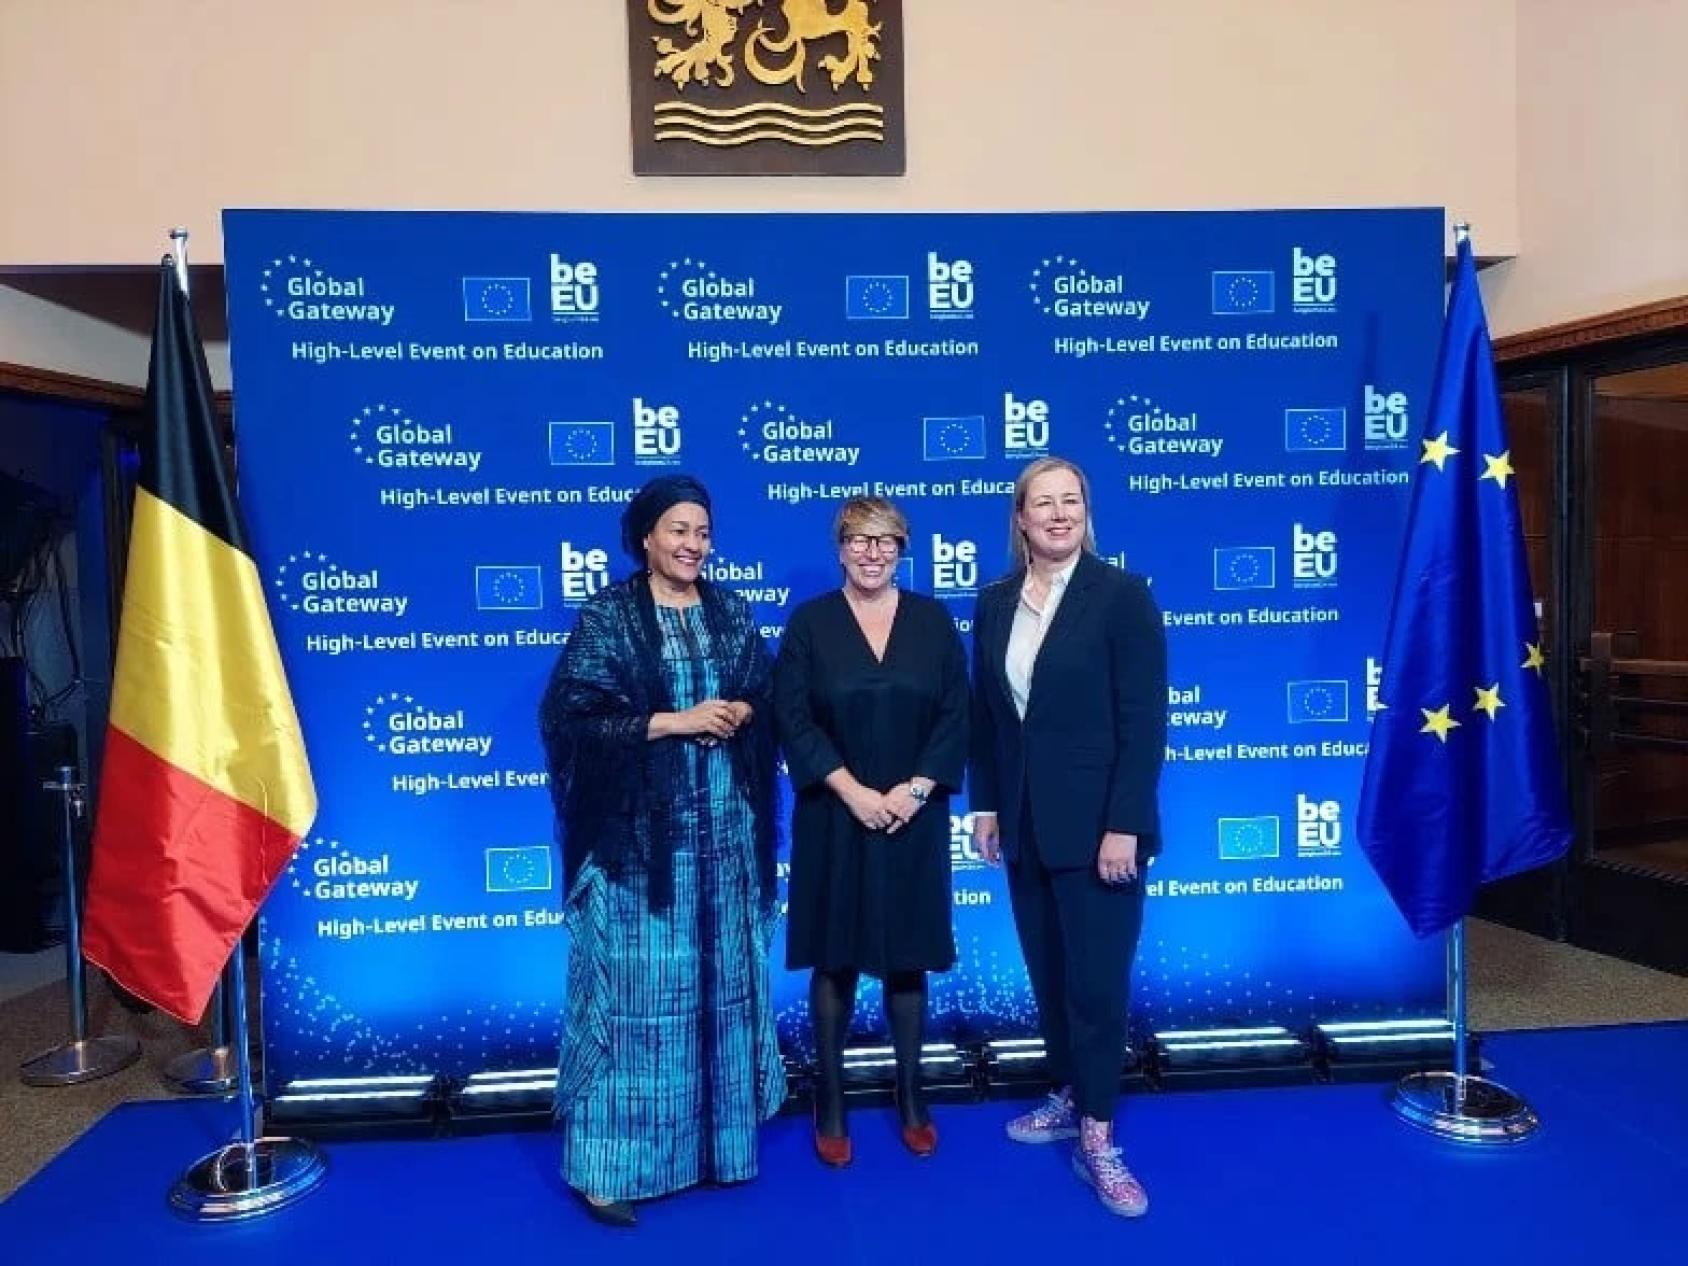 Three women stand in front of a backdrop that has the EU logo. On either side of the backdrop is the EU flag and Belgian Flag